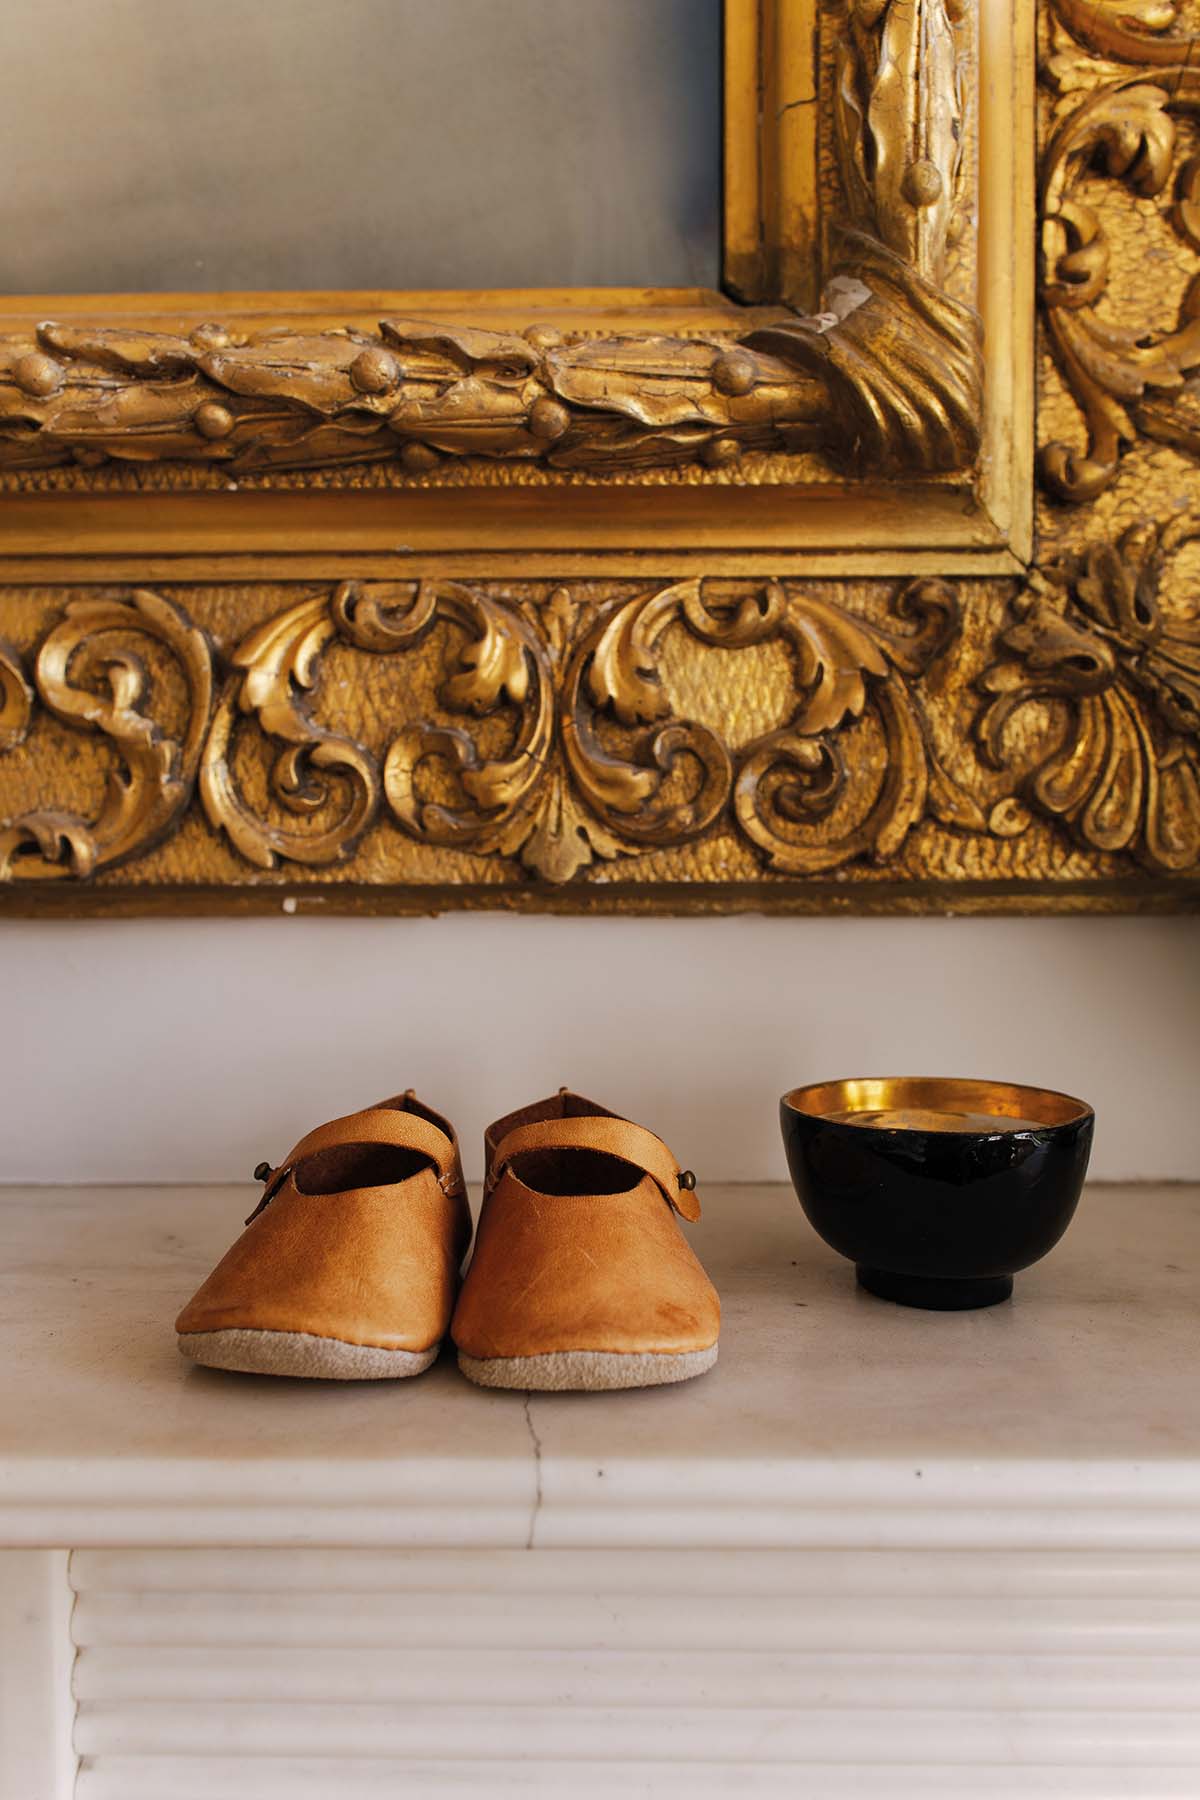 a pair of small brown shoes and a small dish sit on a mantlepiece under a gold framed mirror